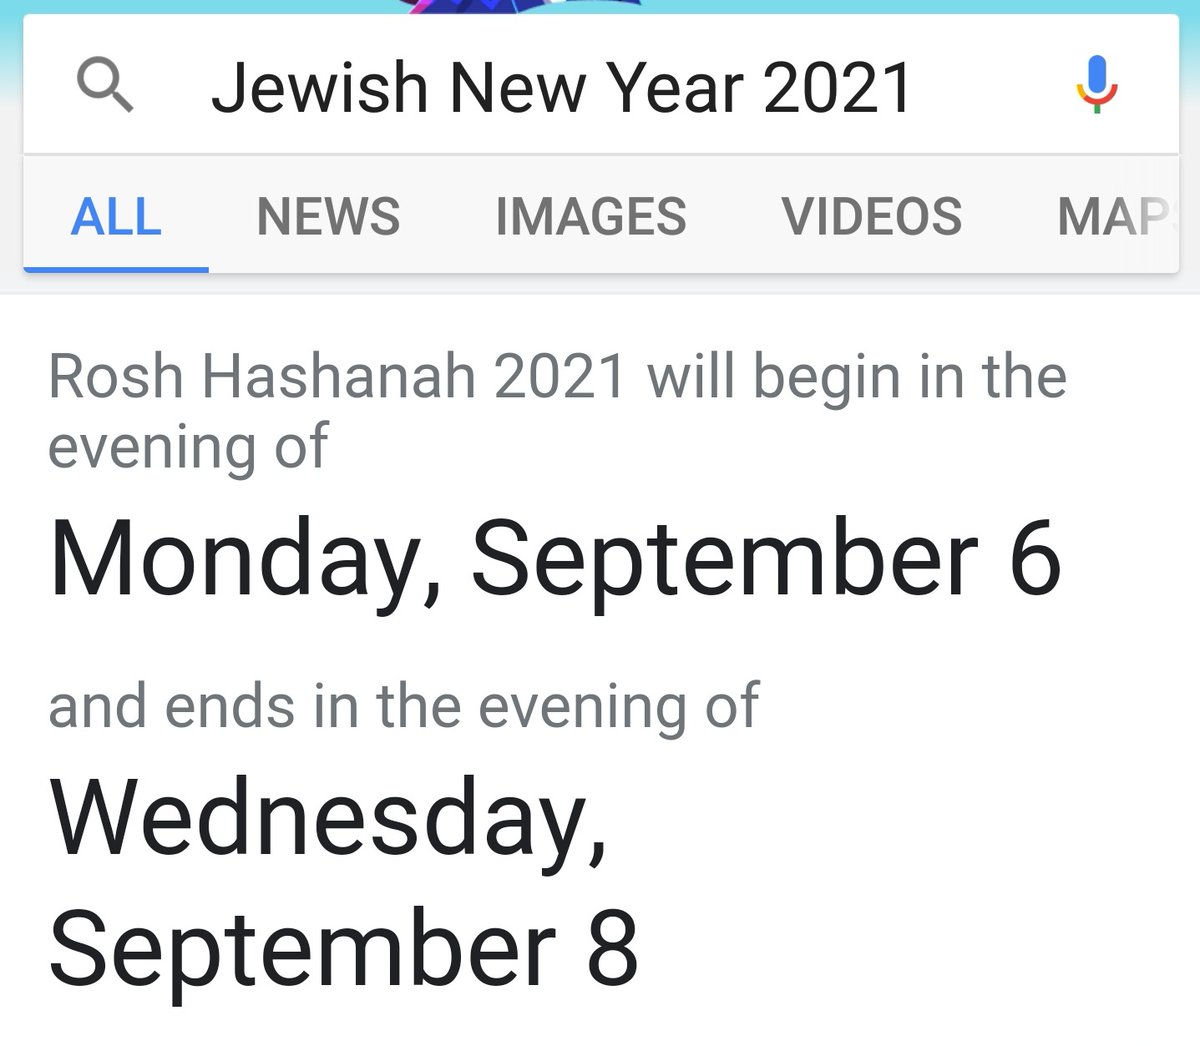 I know. It's confusing. If you looked up the Jewish festivals this year, you'd think the Golden Ray shipwreck in Brunswick kicked off the Israeli New Year, since it falls right on Sept 8th 2021, right? But nooo...(Judaism follows the Babylonian lunar calendar, not the Torah's.)